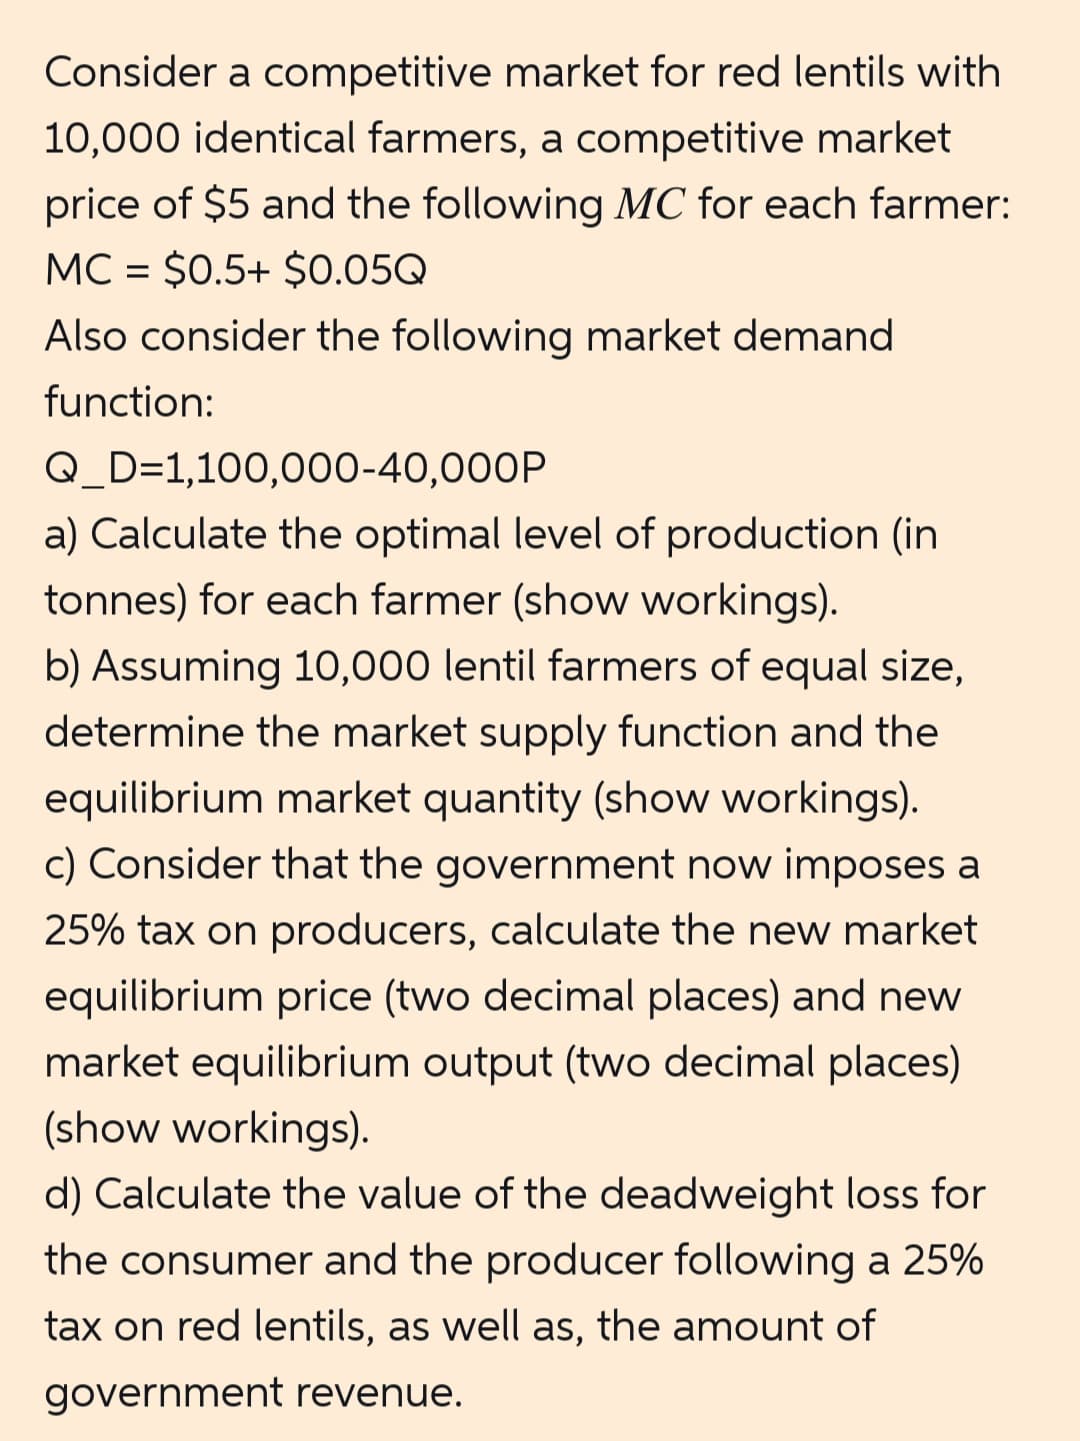 Consider a competitive market for red lentils with
10,000 identical farmers, a competitive market
price of $5 and the following MC for each farmer:
MC = $0.5+ $0.05Q
Also consider the following market demand
function:
Q_D=1,100,000-40,000P
a) Calculate the optimal level of production (in
tonnes) for each farmer (show workings).
b) Assuming 10,000 lentil farmers of equal size,
determine the market supply function and the
equilibrium market quantity (show workings).
c) Consider that the government now imposes a
25% tax on producers, calculate the new market
equilibrium price (two decimal places) and new
market equilibrium output (two decimal places)
(show workings).
d) Calculate the value of the deadweight loss for
the consumer and the producer following a 25%
tax on red lentils, as well as, the amount of
government revenue.